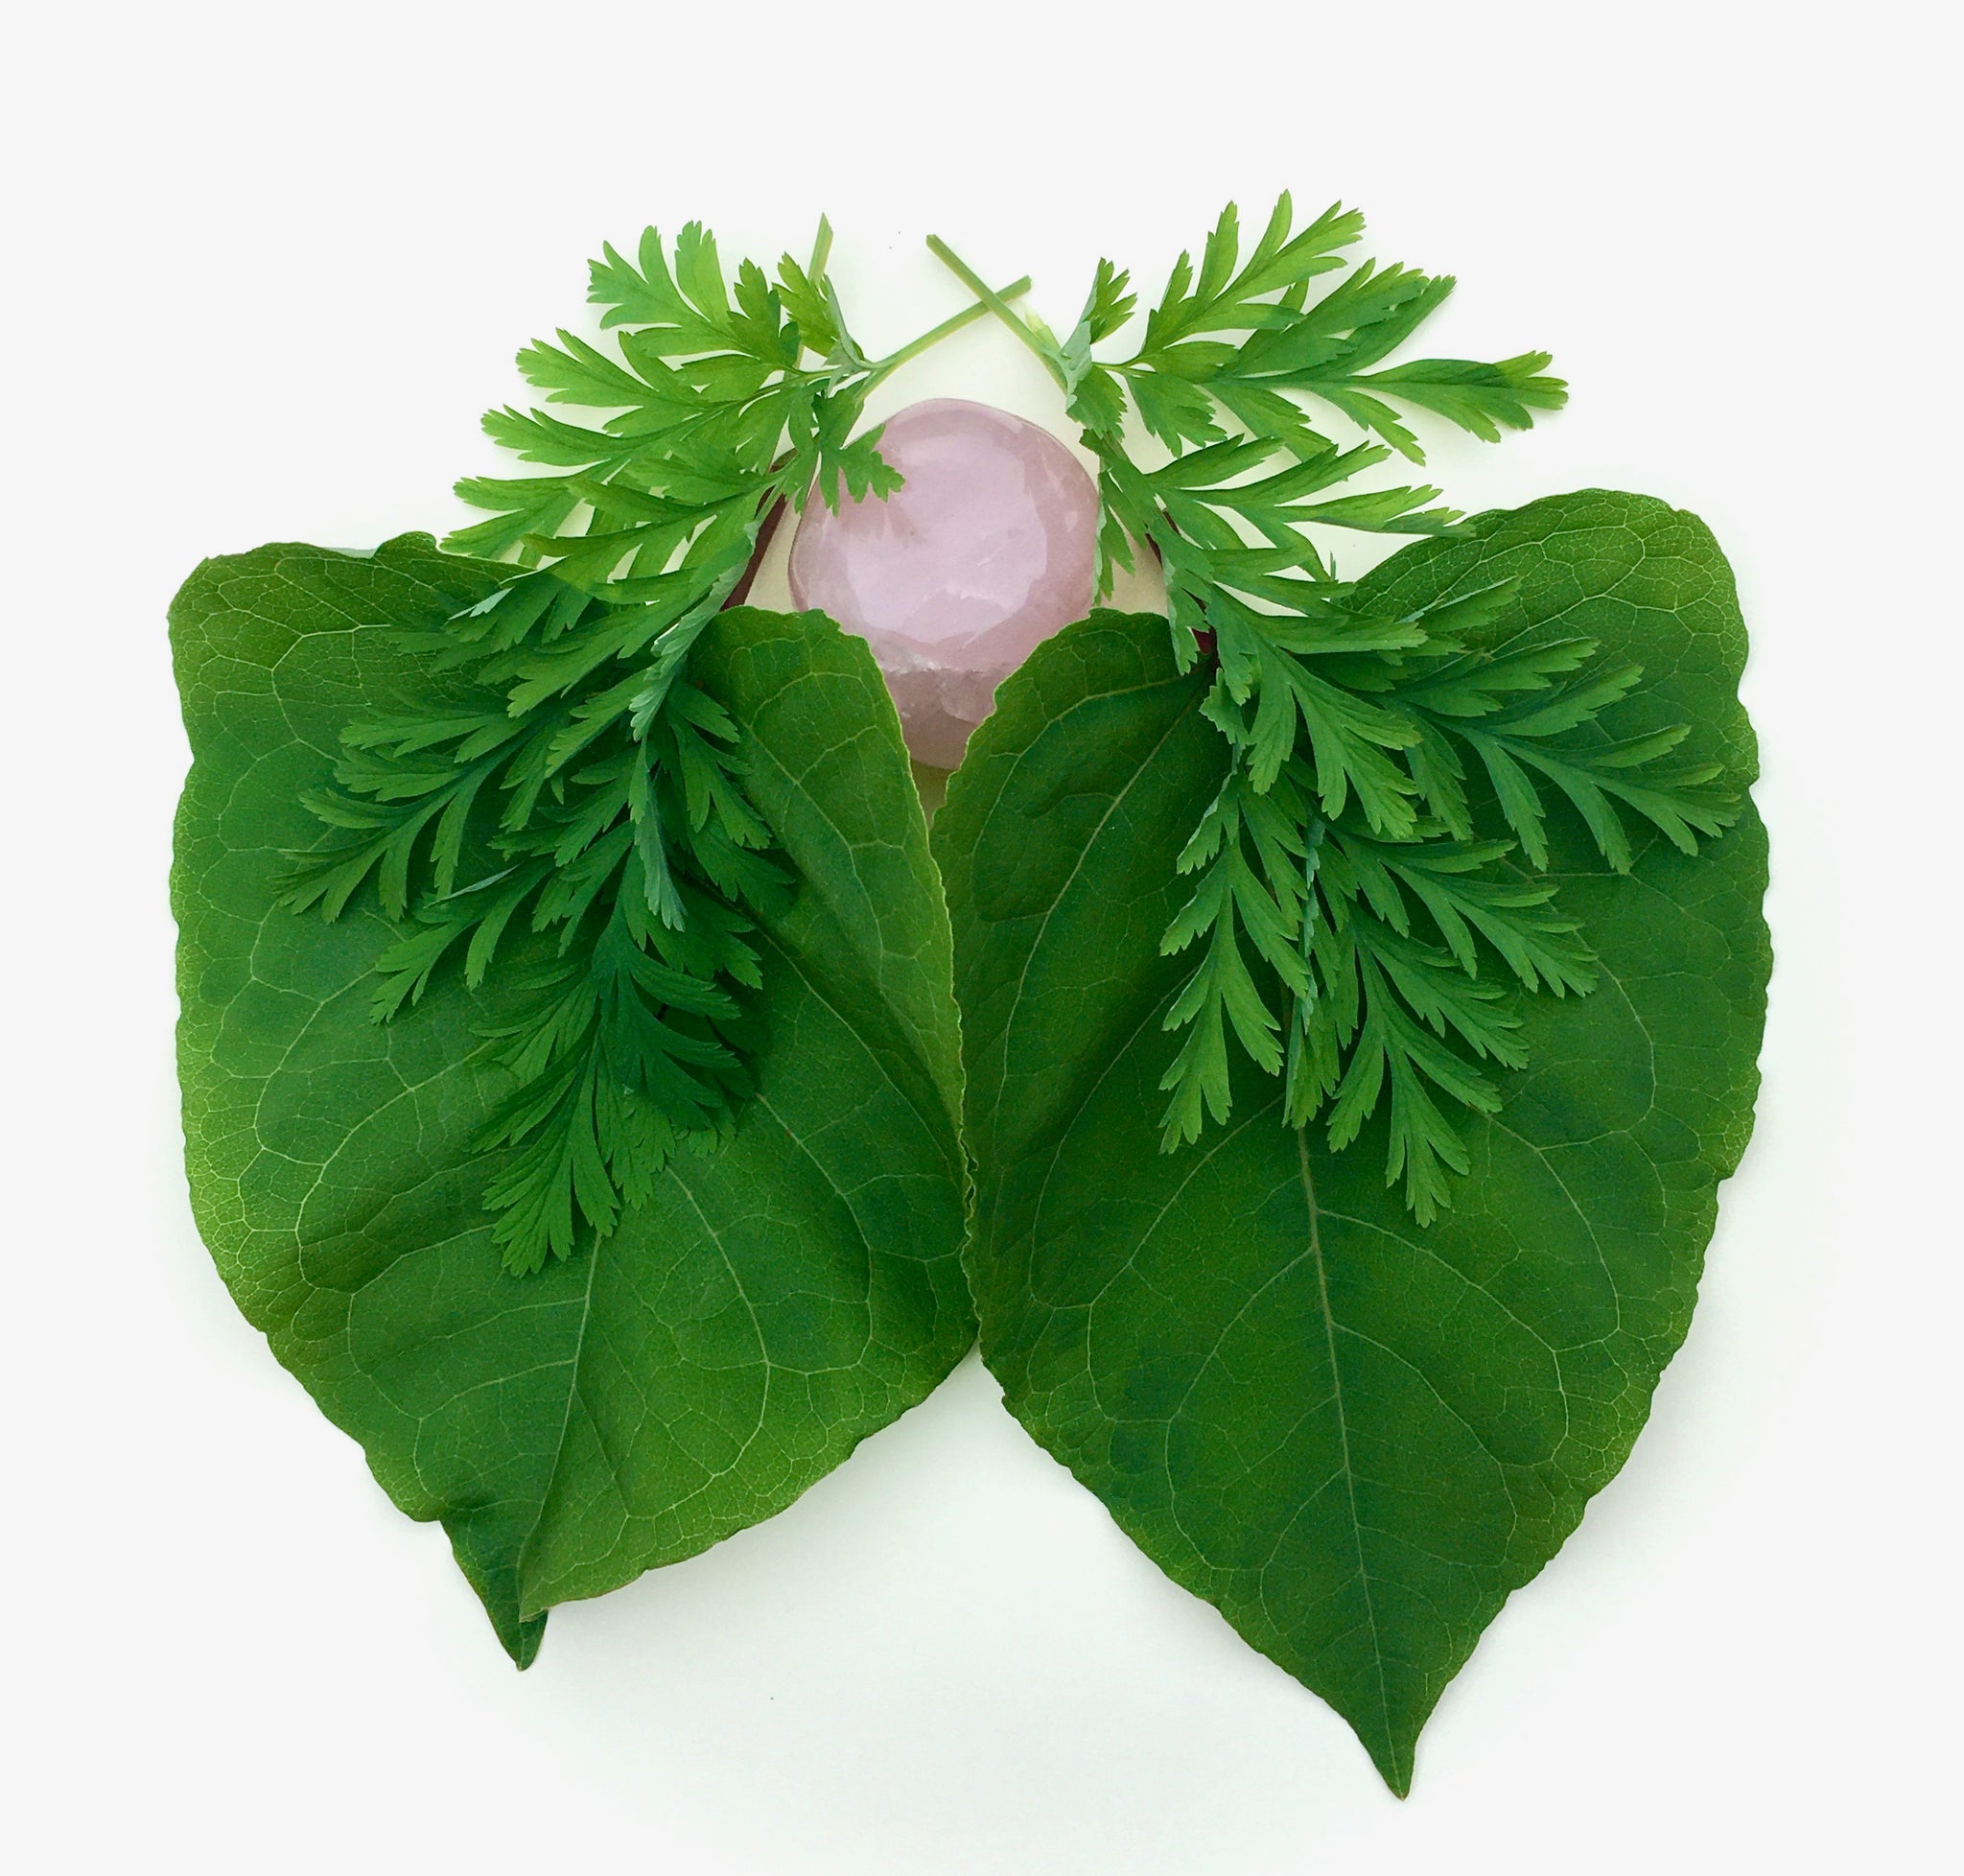 A rose quartz heart, surrounded by lungs made of  gentle Bleeding Heart leaves and large soft Japanese Knotweed leaves. 